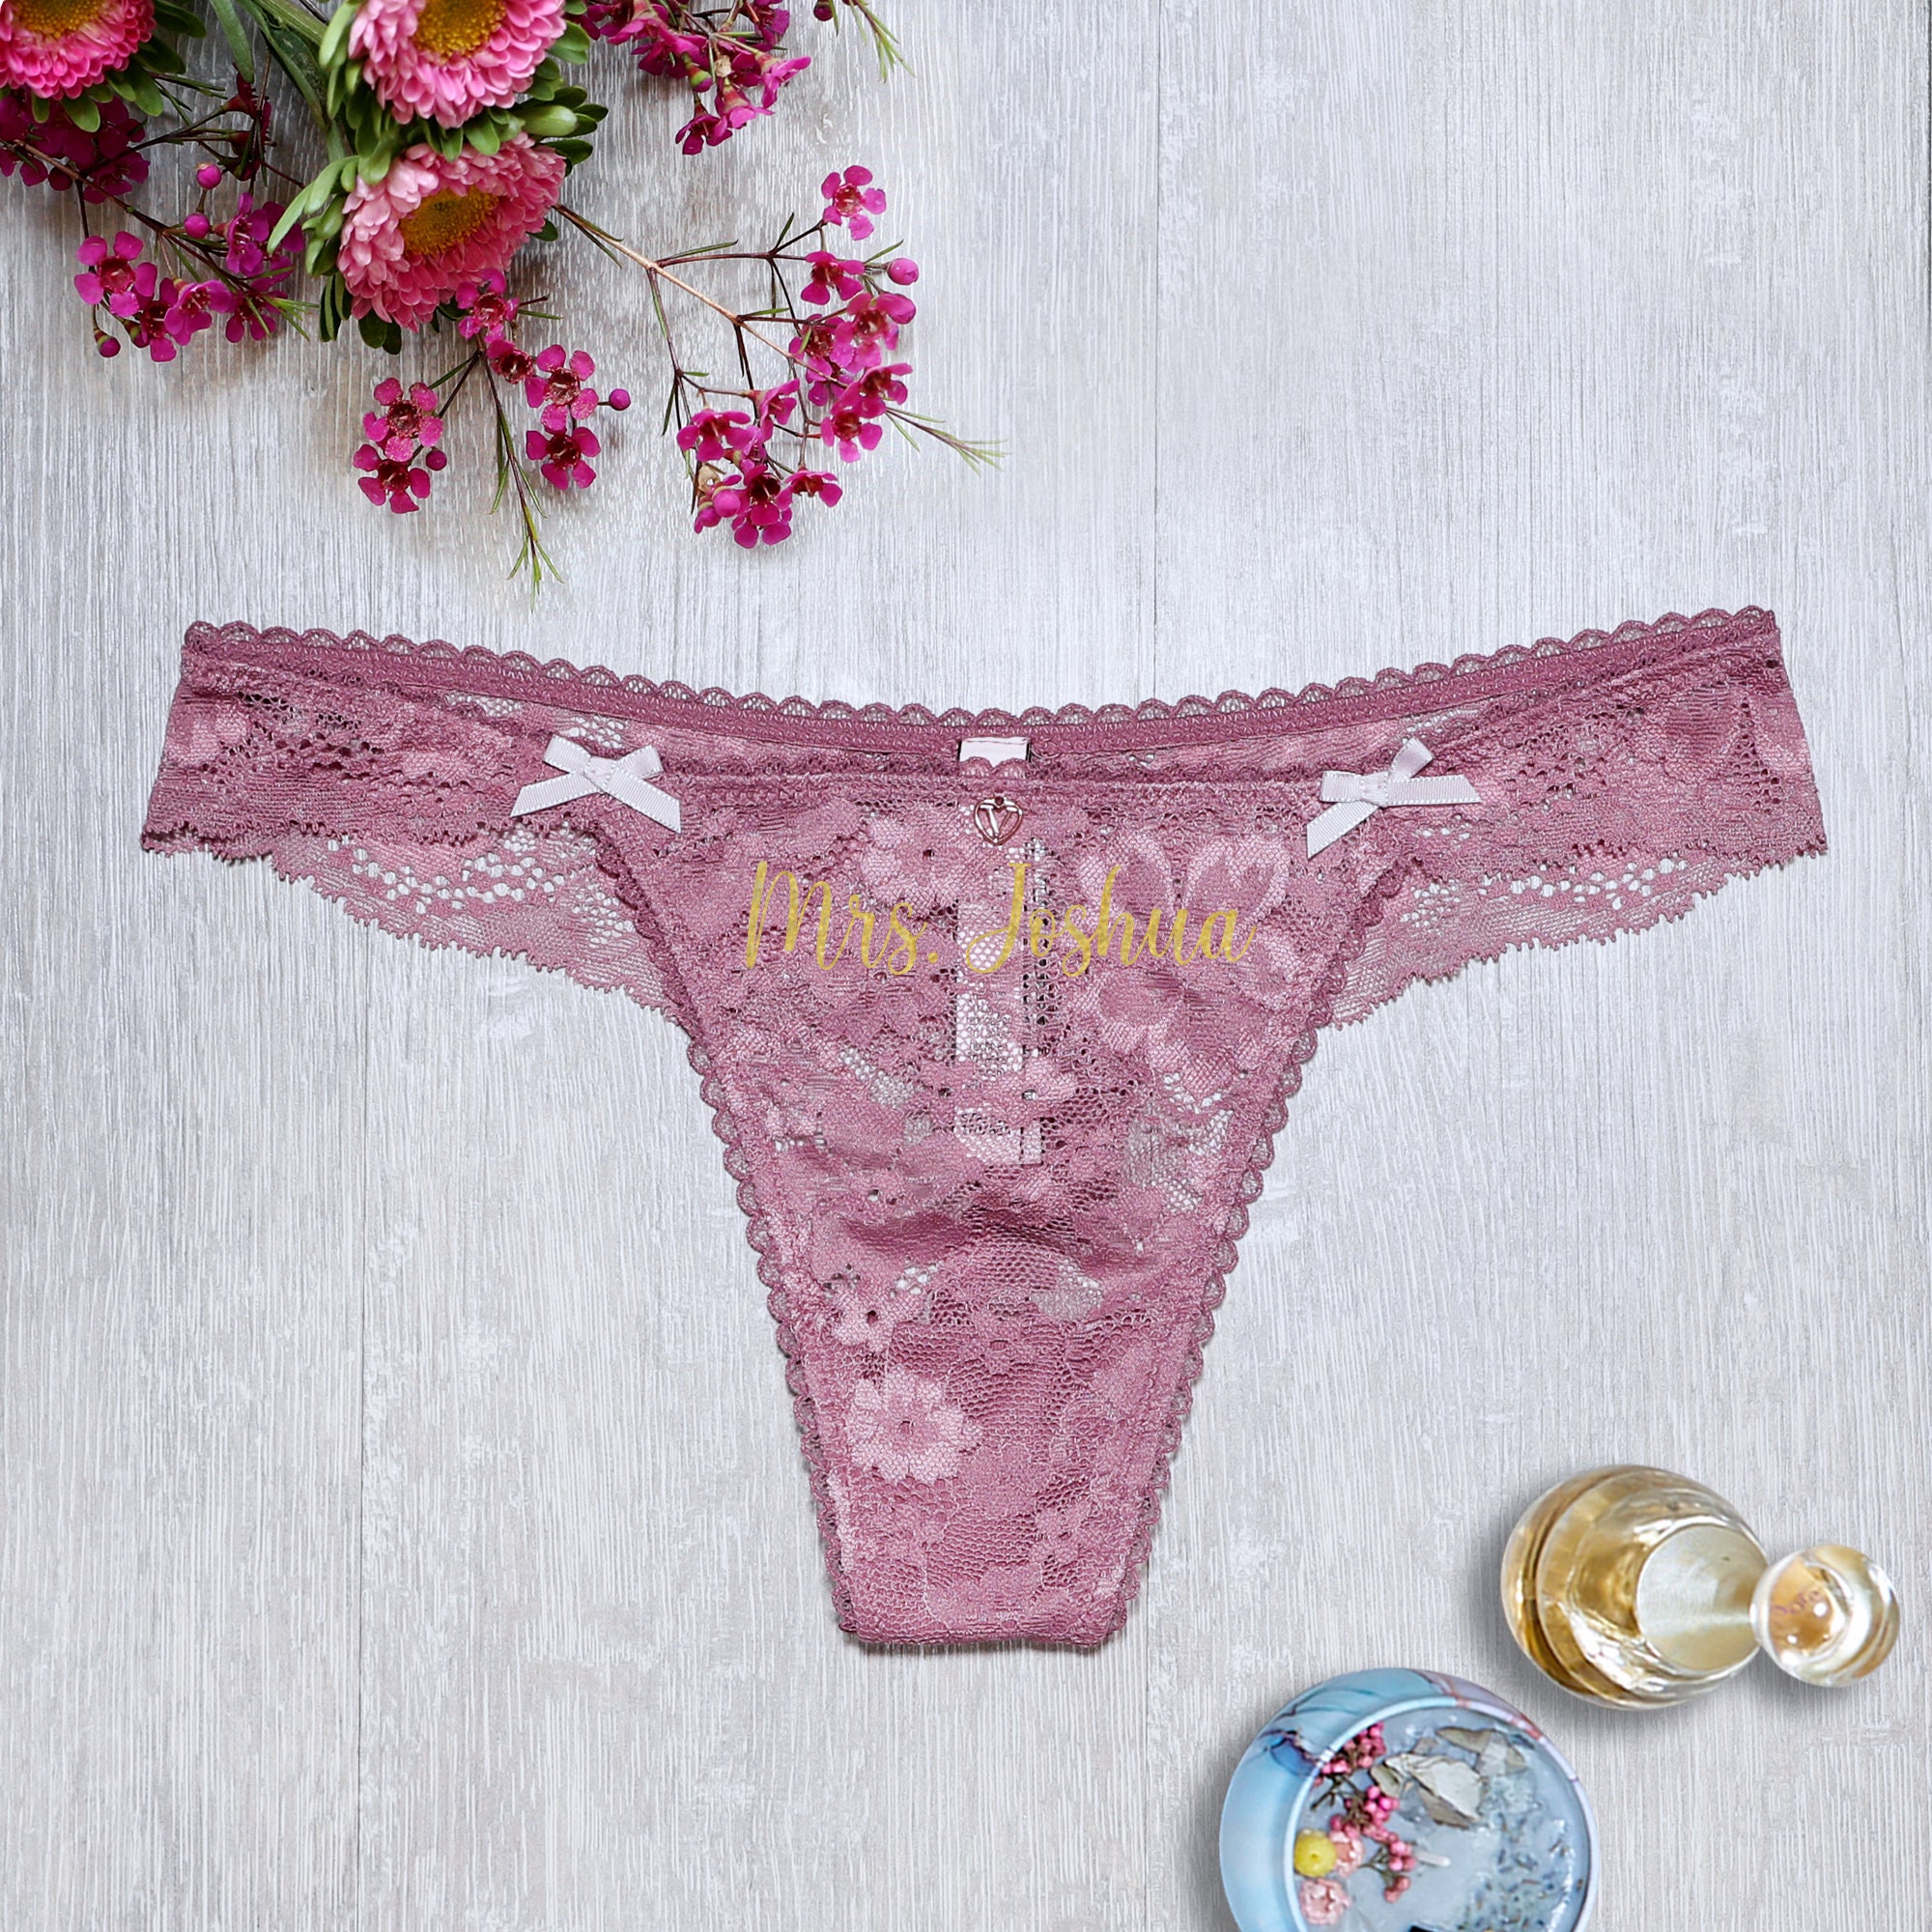 Buy New Lace Wrap Victorias Secret Thong Underwear, Bride Panties  Personalized, Named Bridal Lingerie Honeymoon Gift, Bachelorette Online in  India 